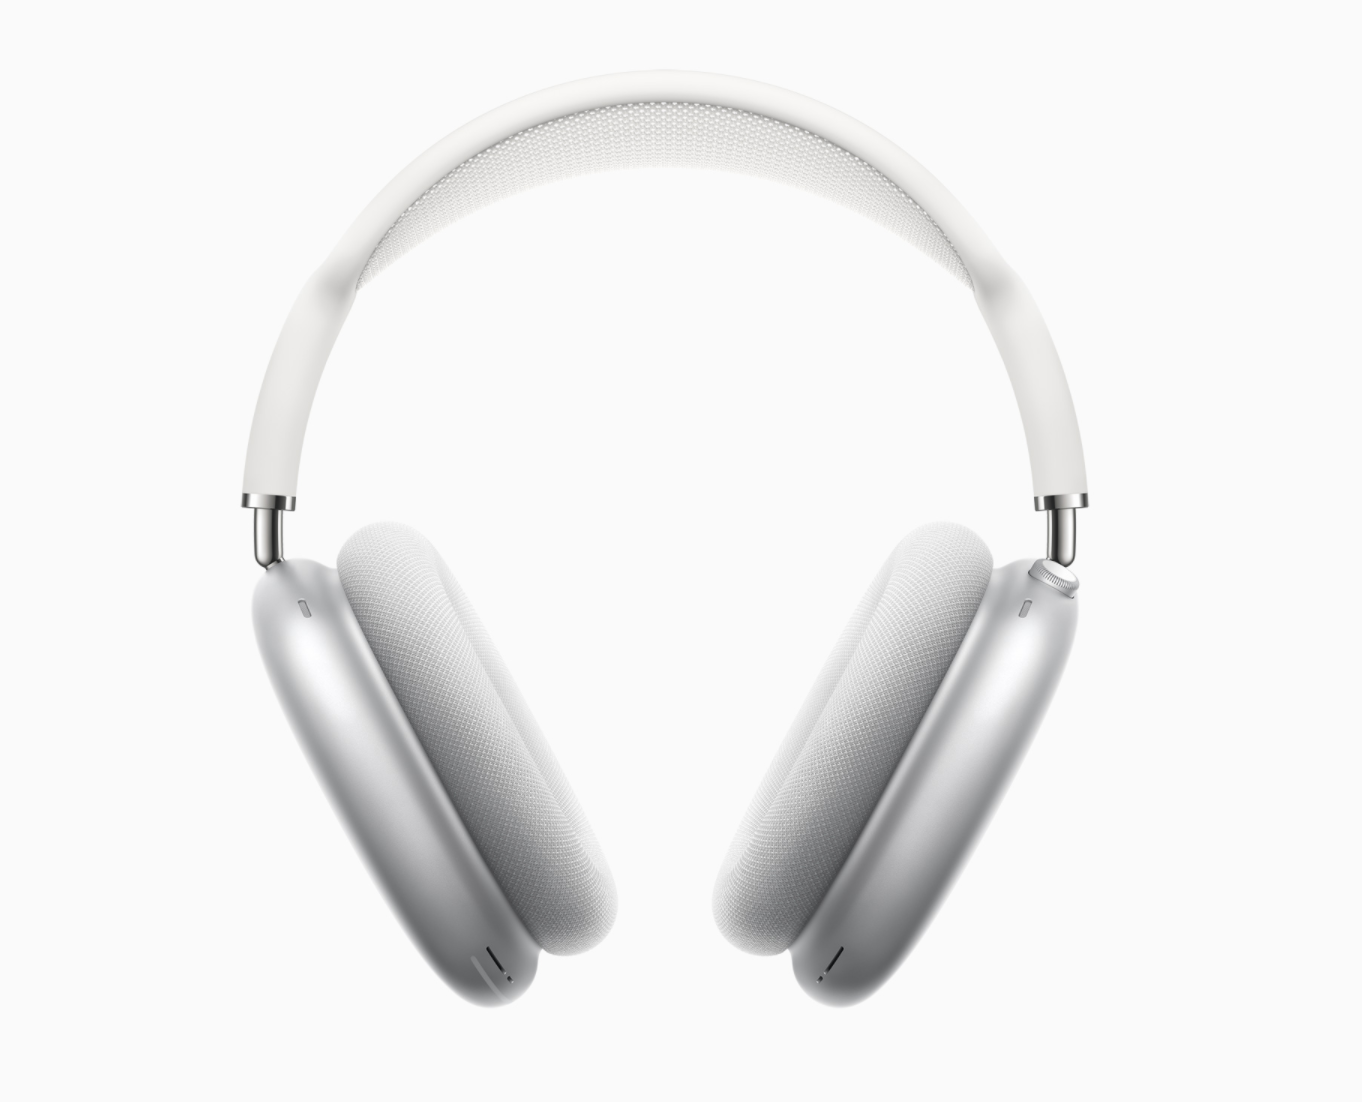 Apple launches its most advanced headphones, AirPods Max, at Rs 59,900 - Latest News | Gadgets Now